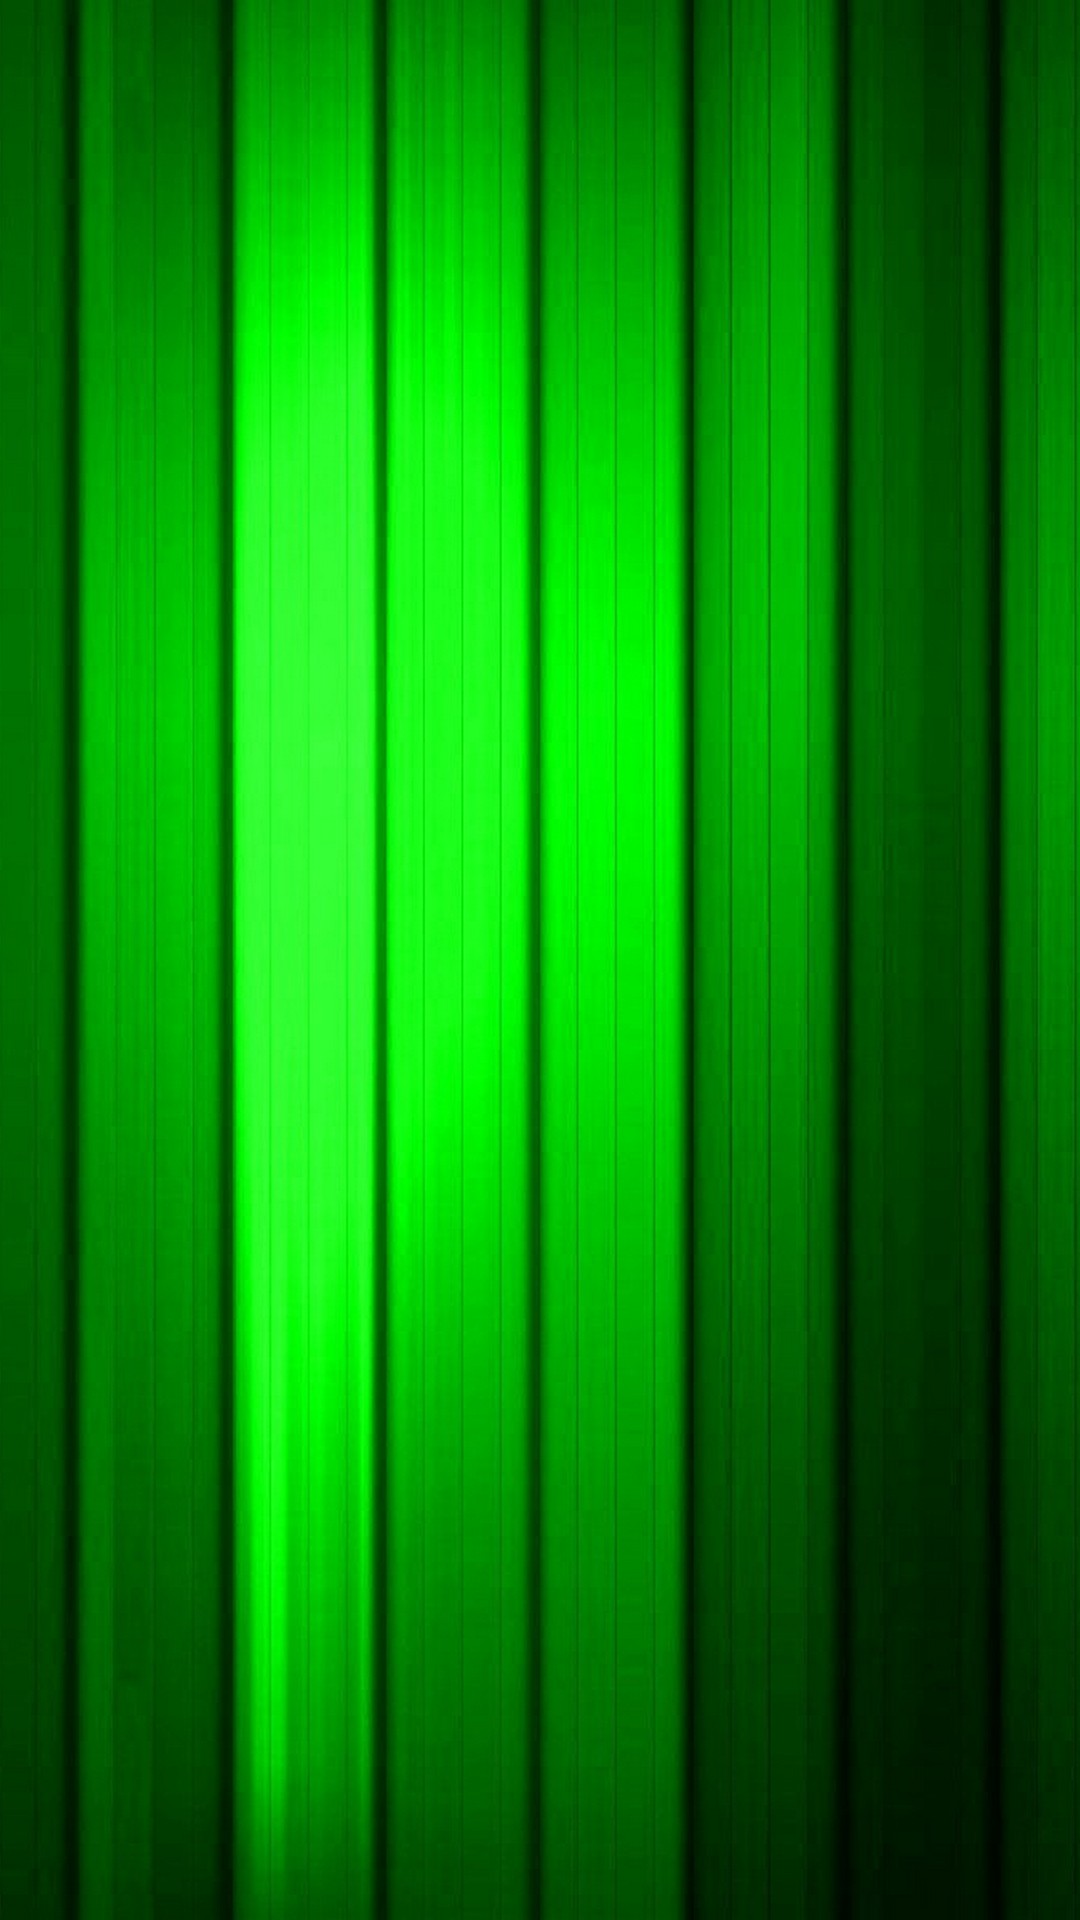 Neon Green Backgrounds For Android with image resolution 1080x1920 pixel. You can make this wallpaper for your Android backgrounds, Tablet, Smartphones Screensavers and Mobile Phone Lock Screen